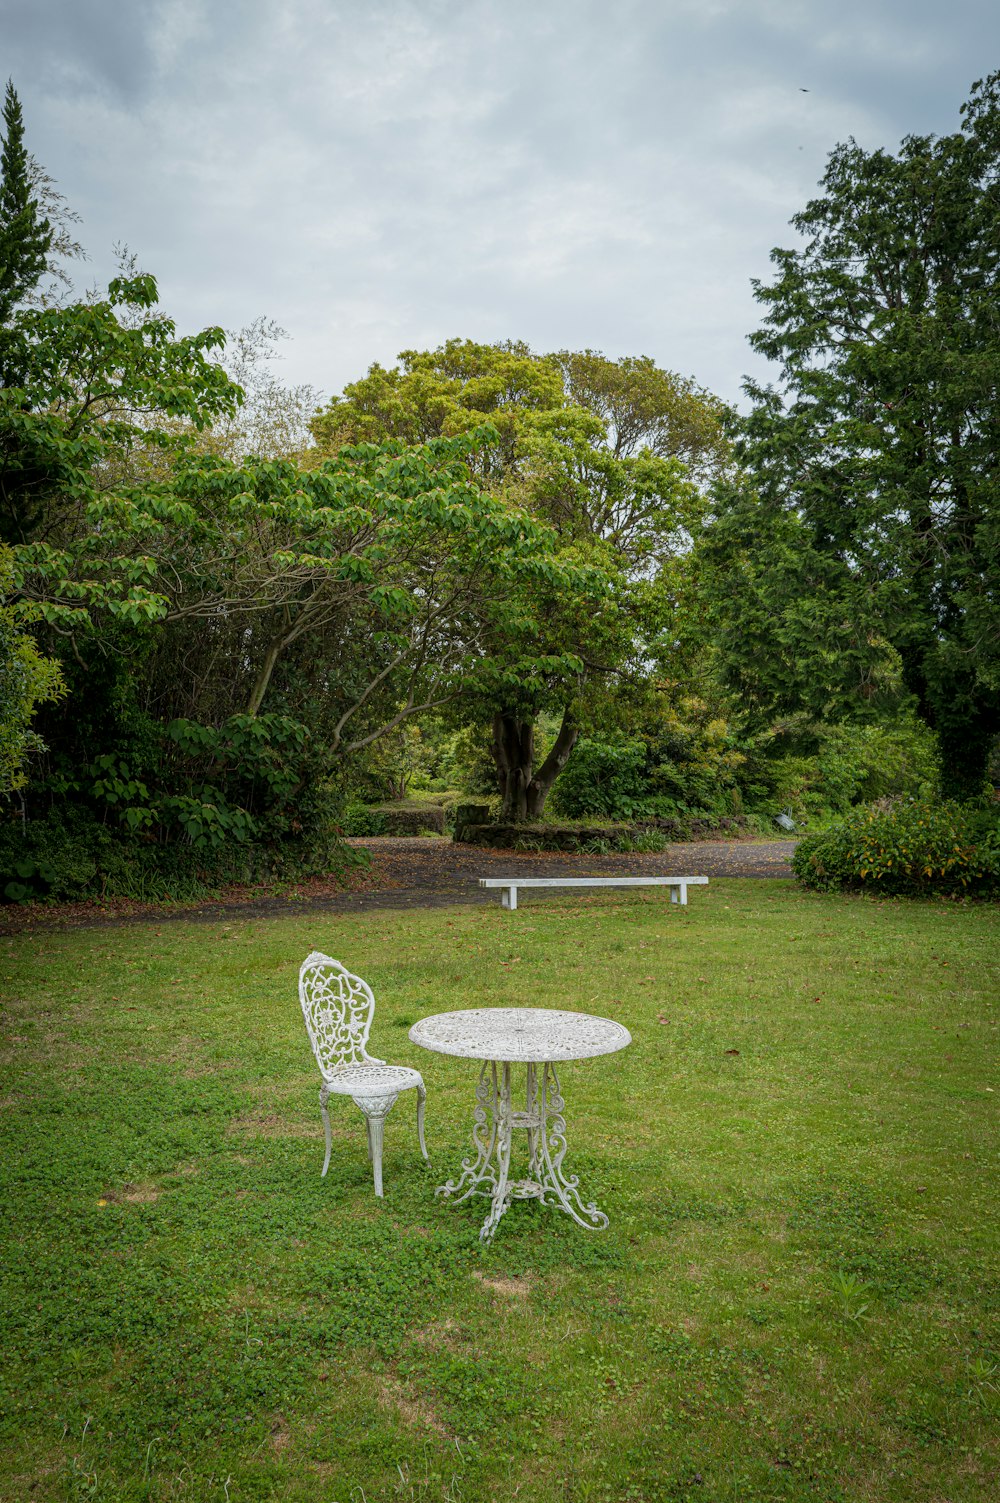 a white table and chairs in a grassy area